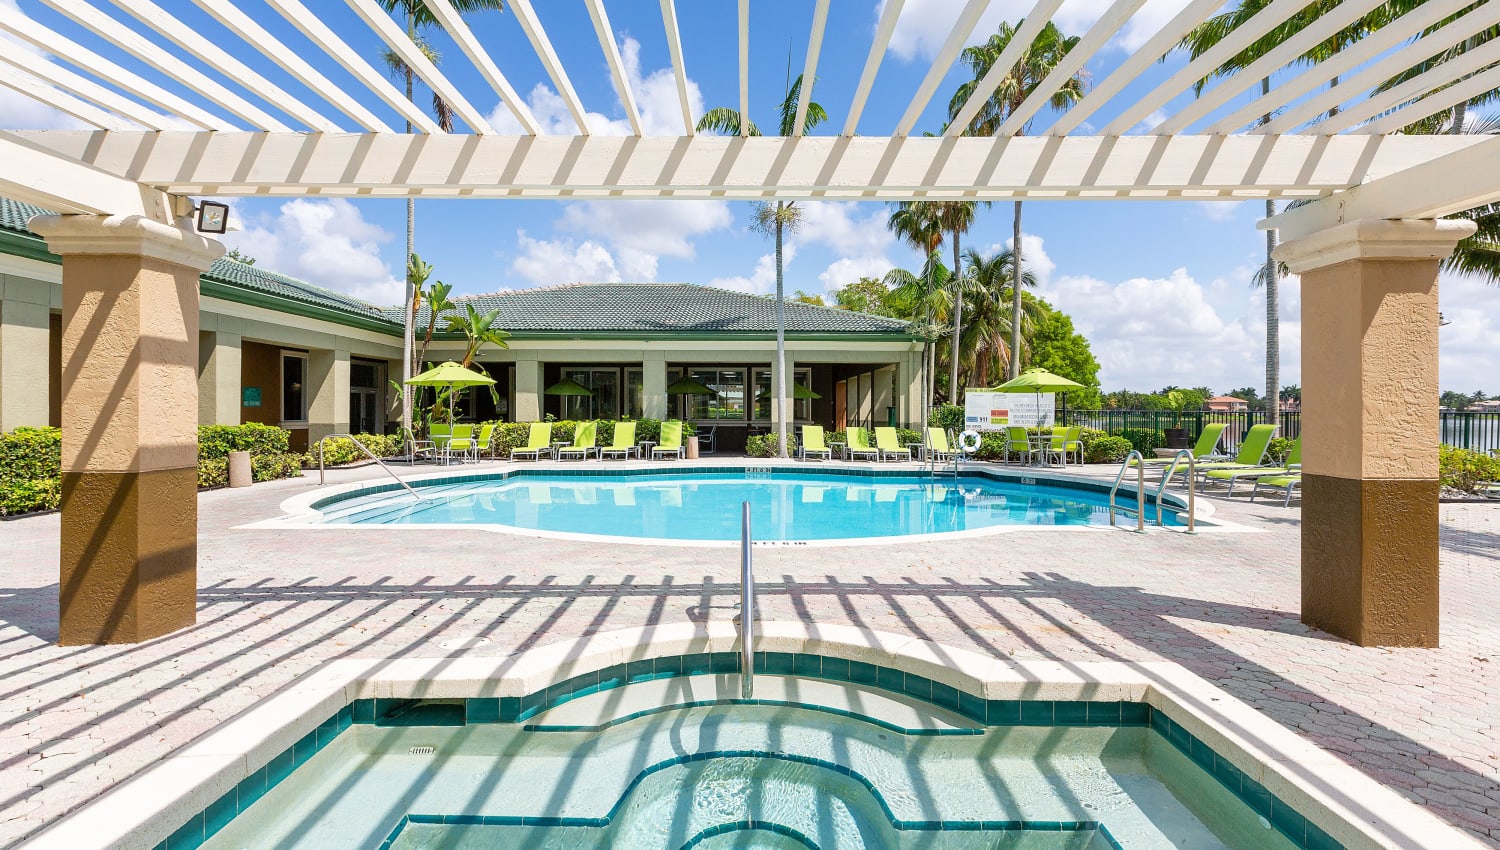 Sparkling pool and jacuzzi at Club Lake Pointe Apartments in Coral Springs, Florida